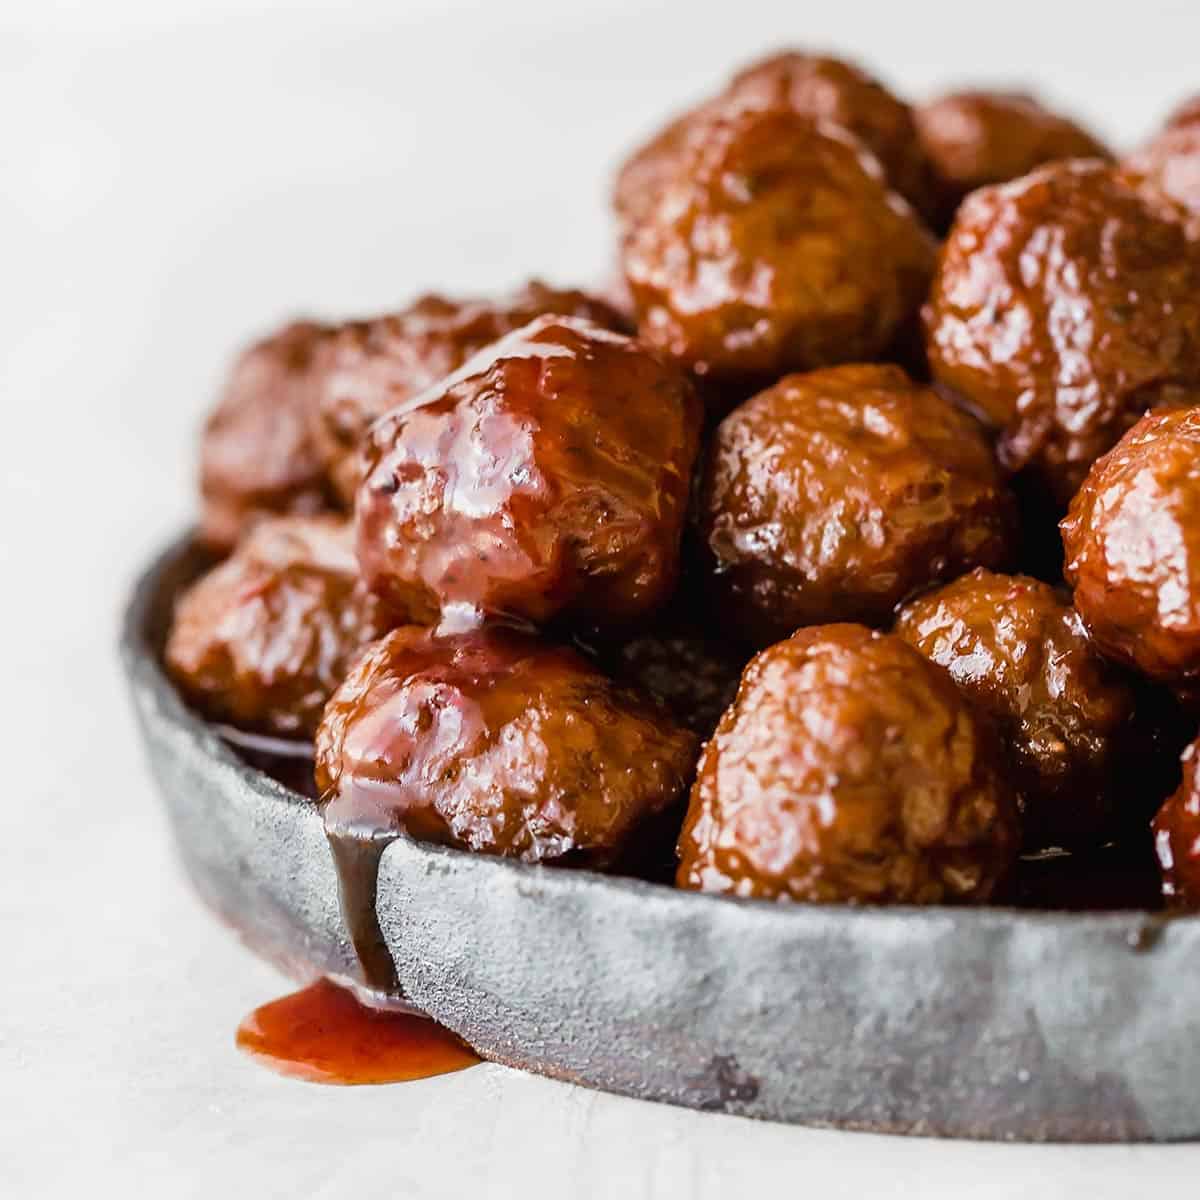 Crock pot Grape Jelly Meatballs on a black plate against a white background.